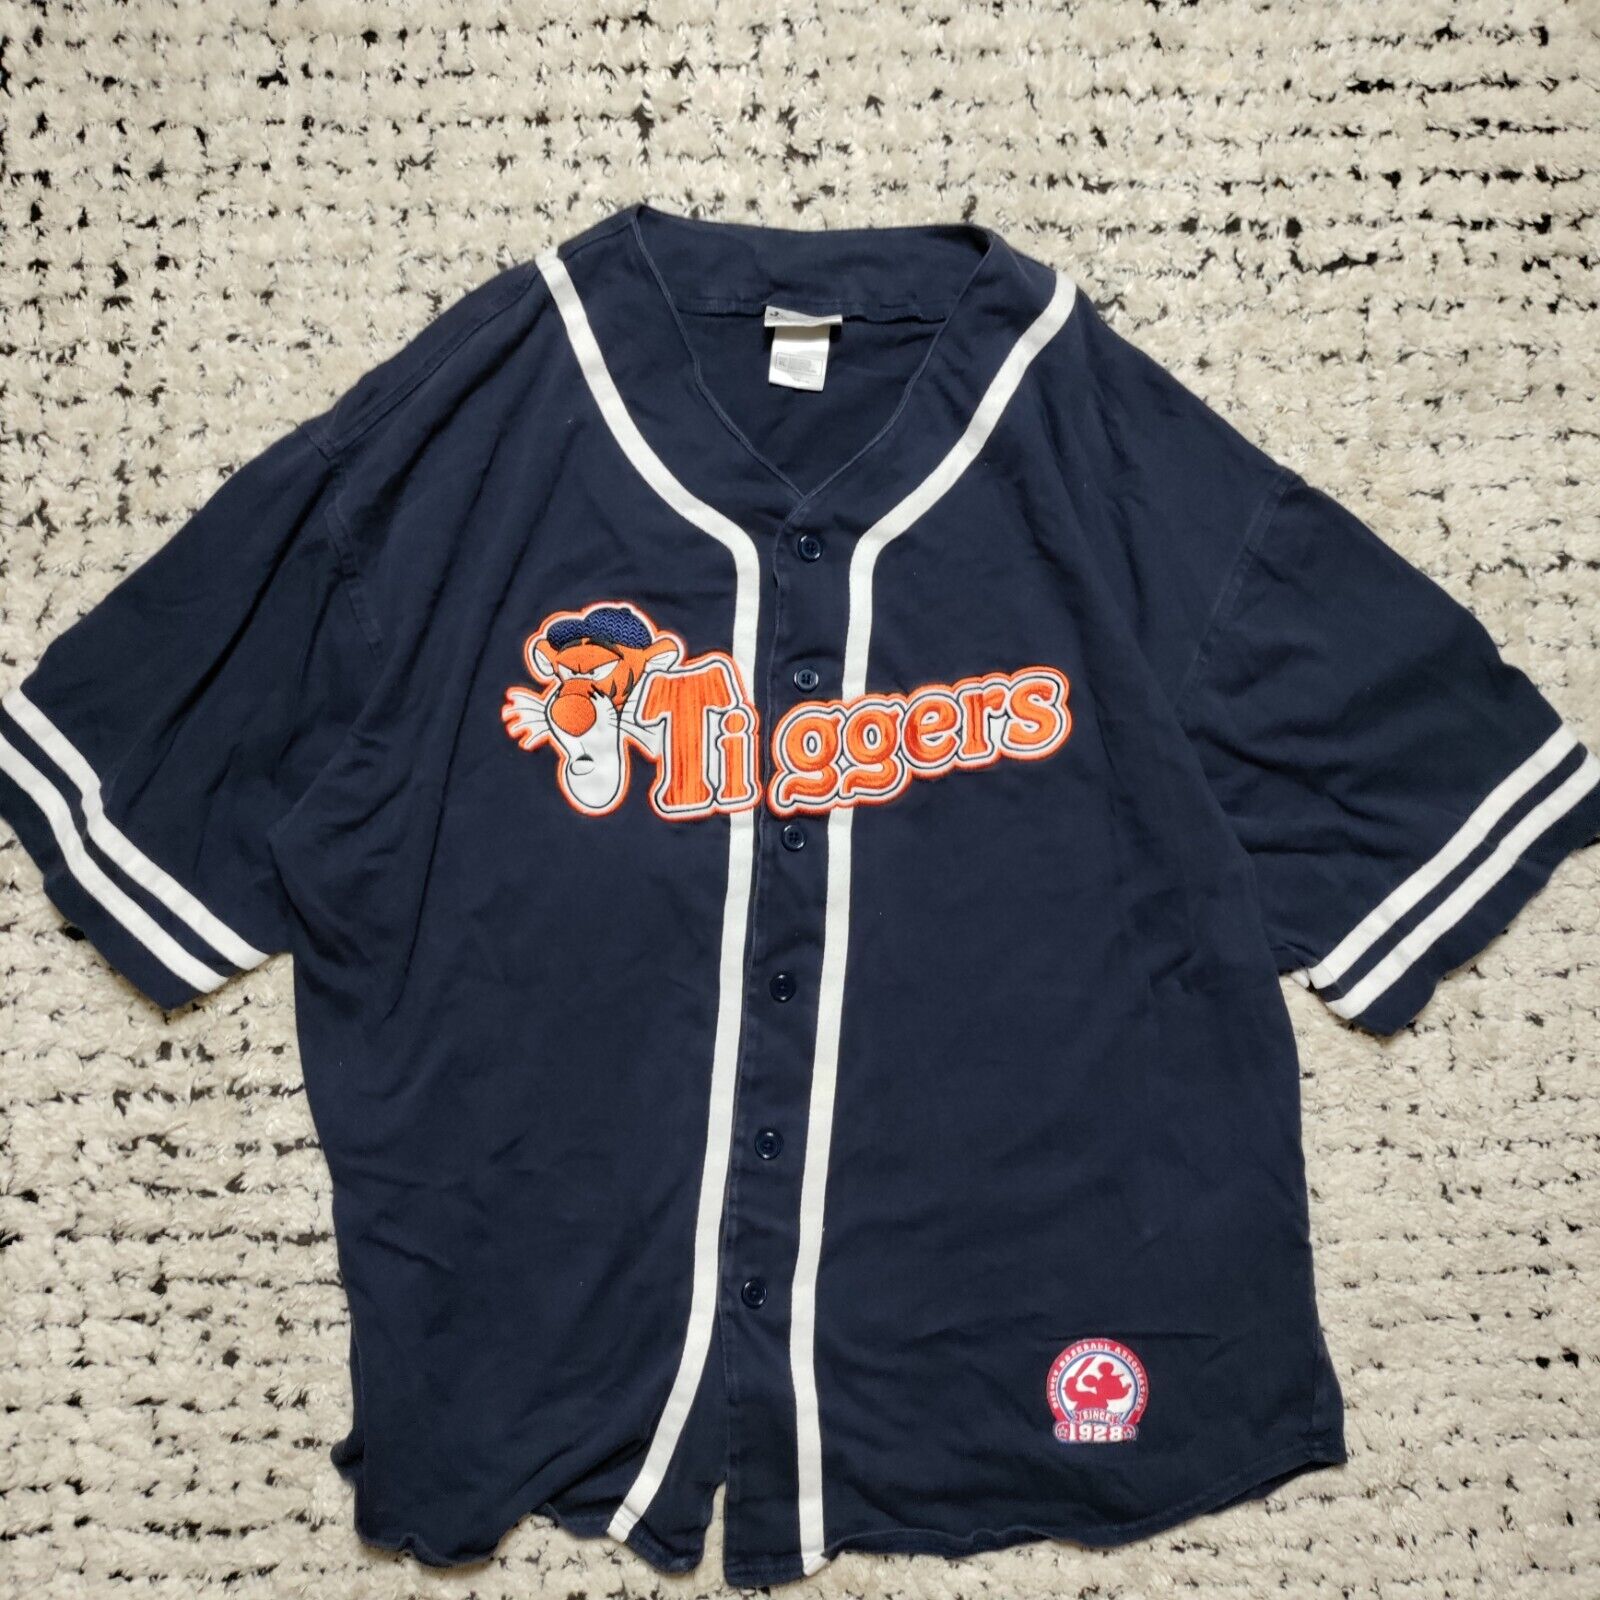 Vintage Disney Tigger Baseball Jersey XL Blue Button Up Embroidered 90s